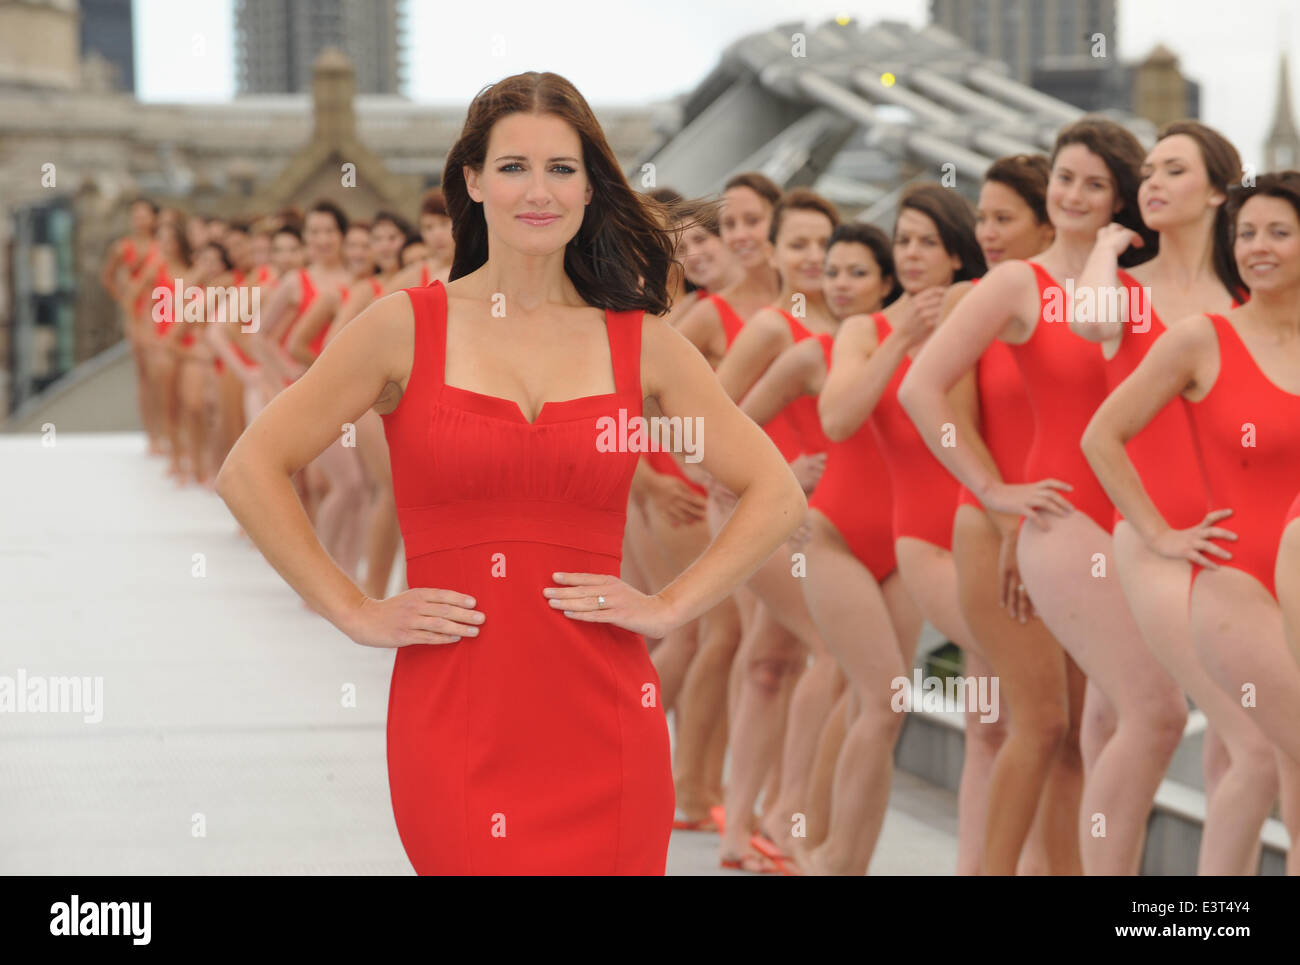 London, UK, UK. 12th July, 2009. Kirsty Gallagher attends a photocall to celebrate 50 years of Special K at Southbank Centre. © Ferdaus Shamim/ZUMA Wire/ZUMAPRESS.com/Alamy Live News Stock Photo